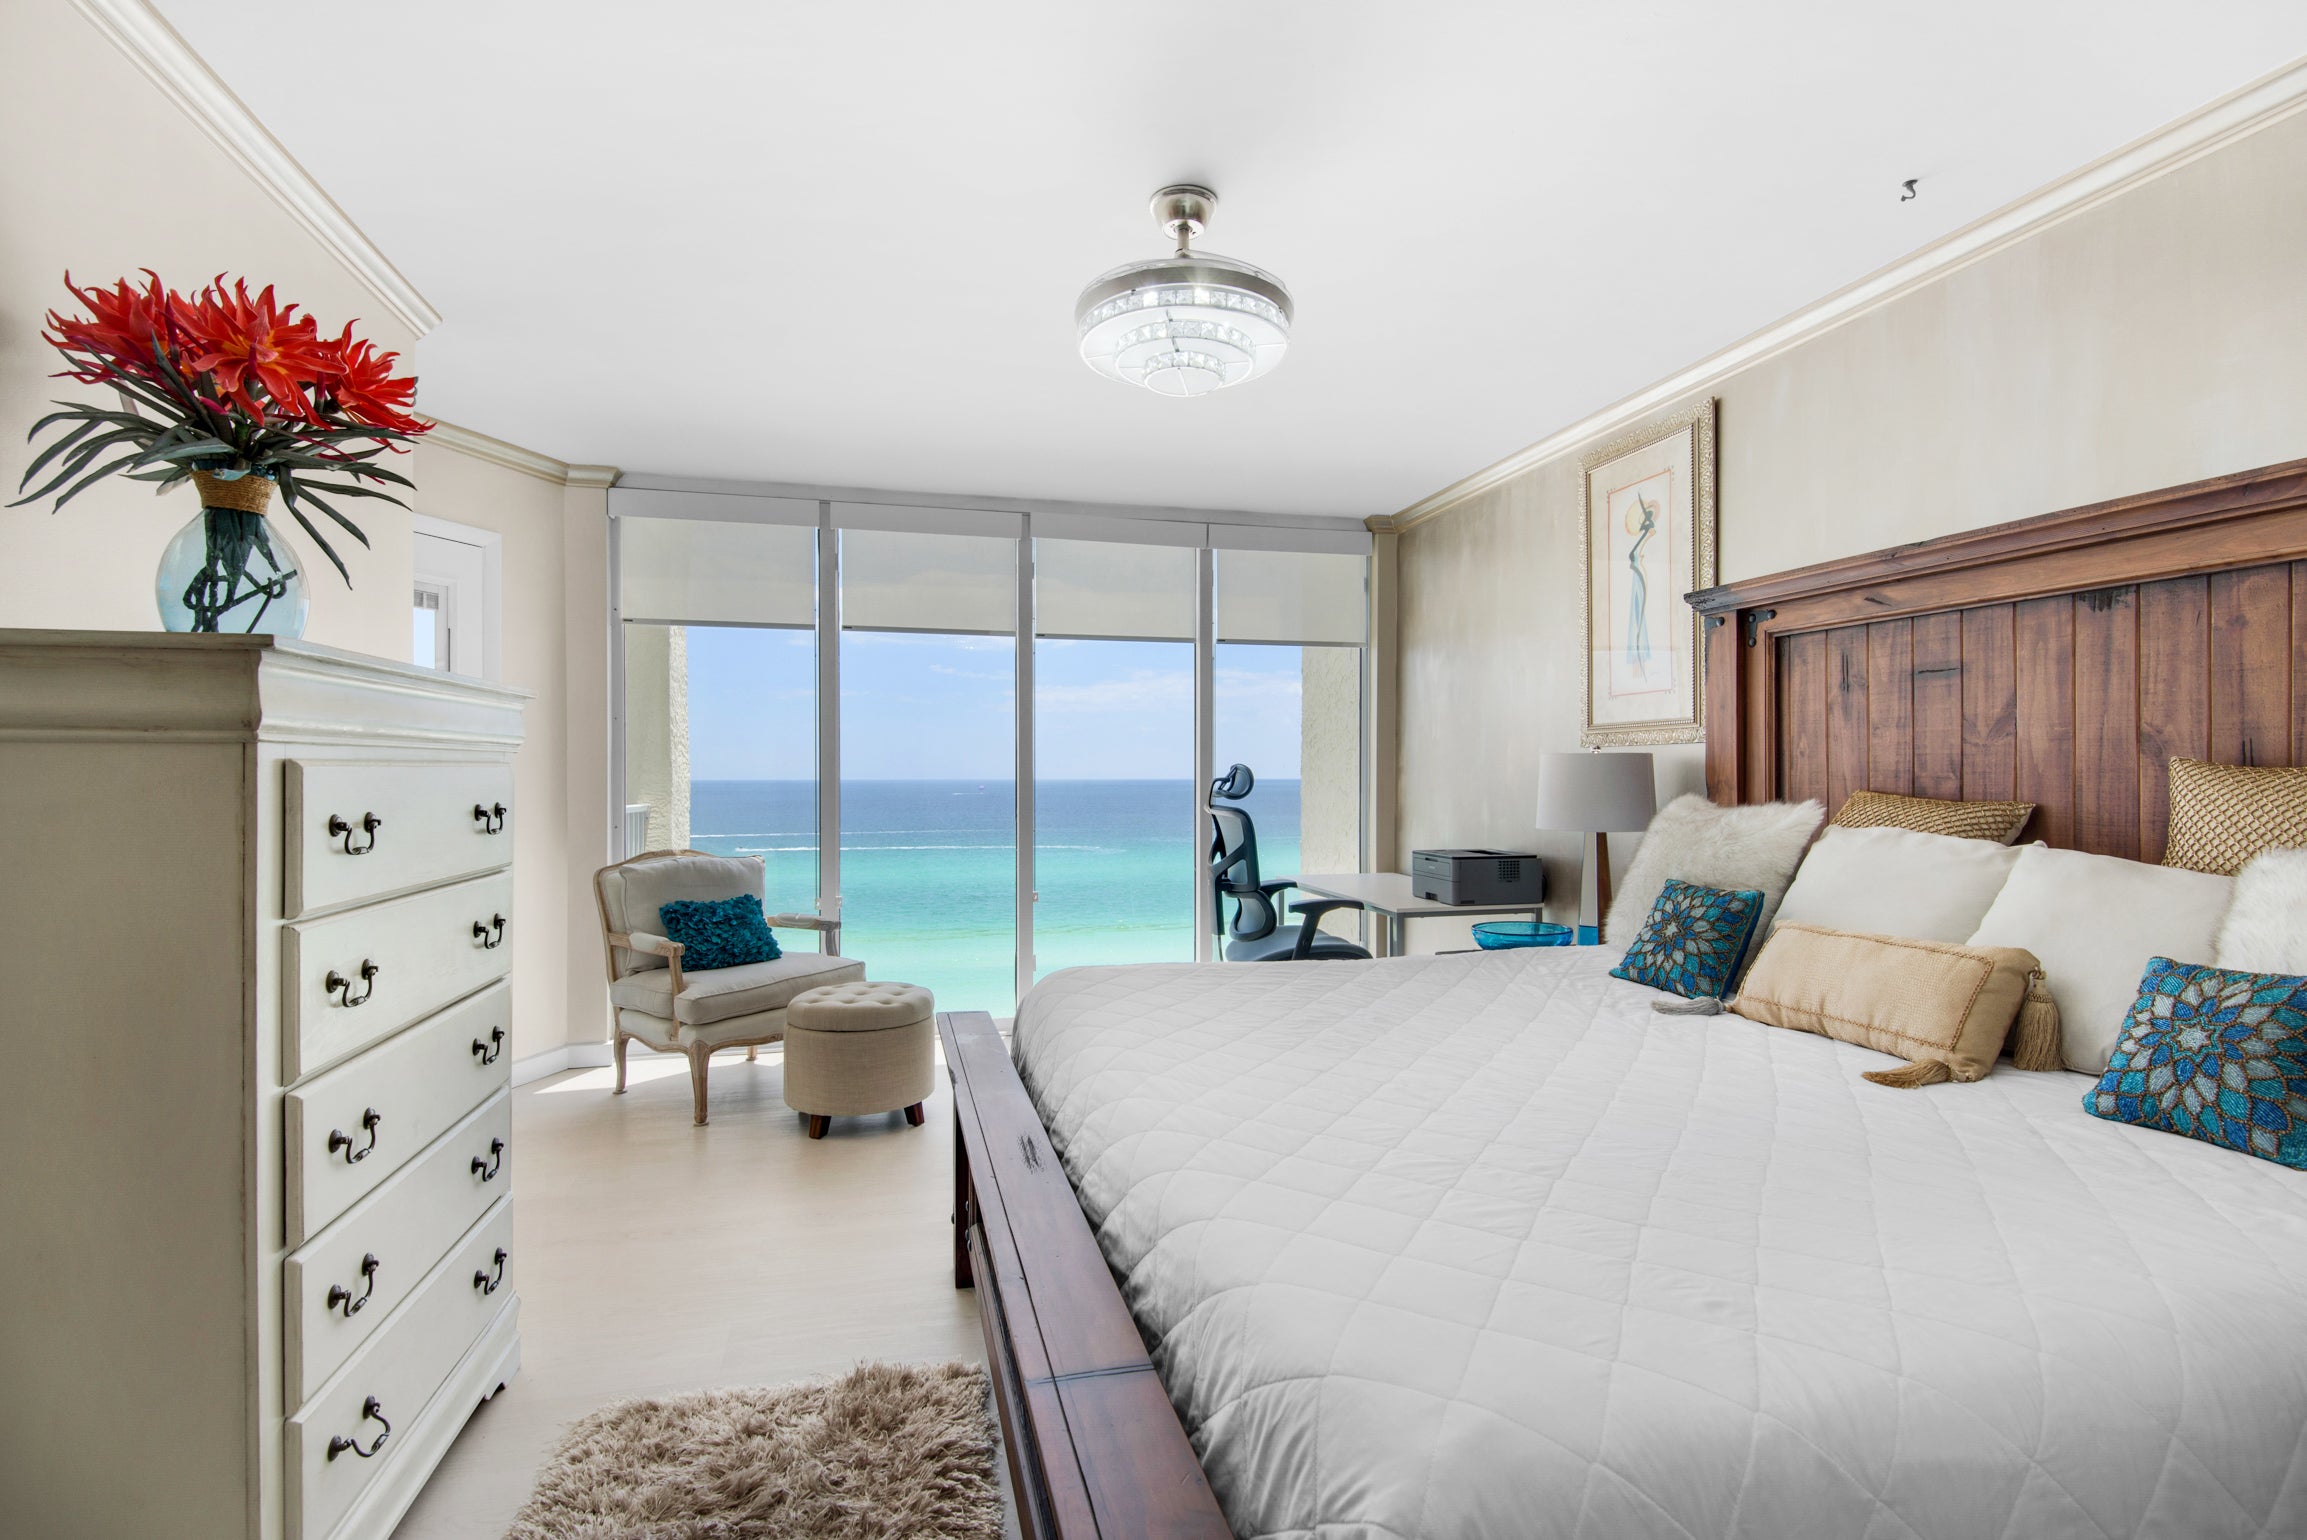 Master bedroom #2 with amazing views